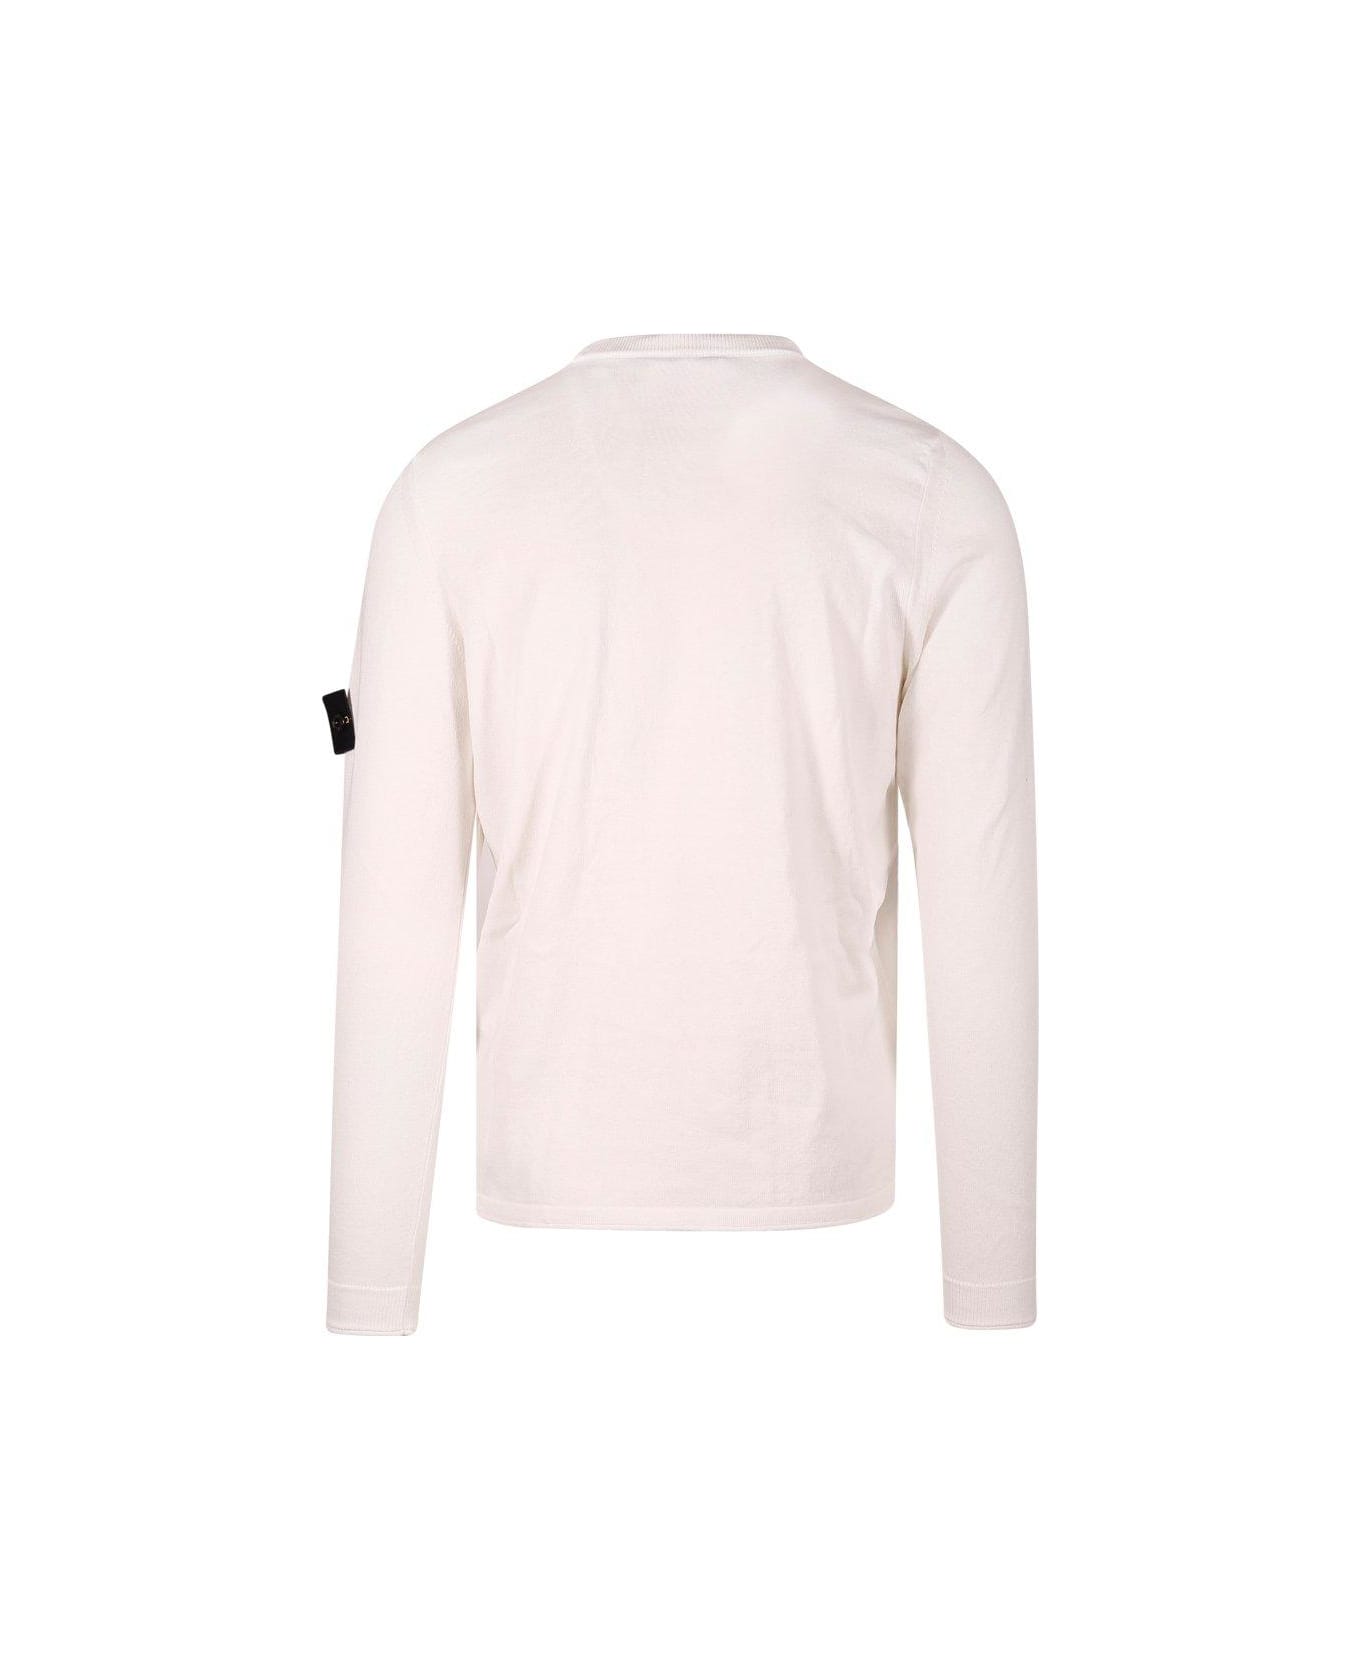 Stone Island Compass Patch Crewneck Knitted Jumper - Bianco